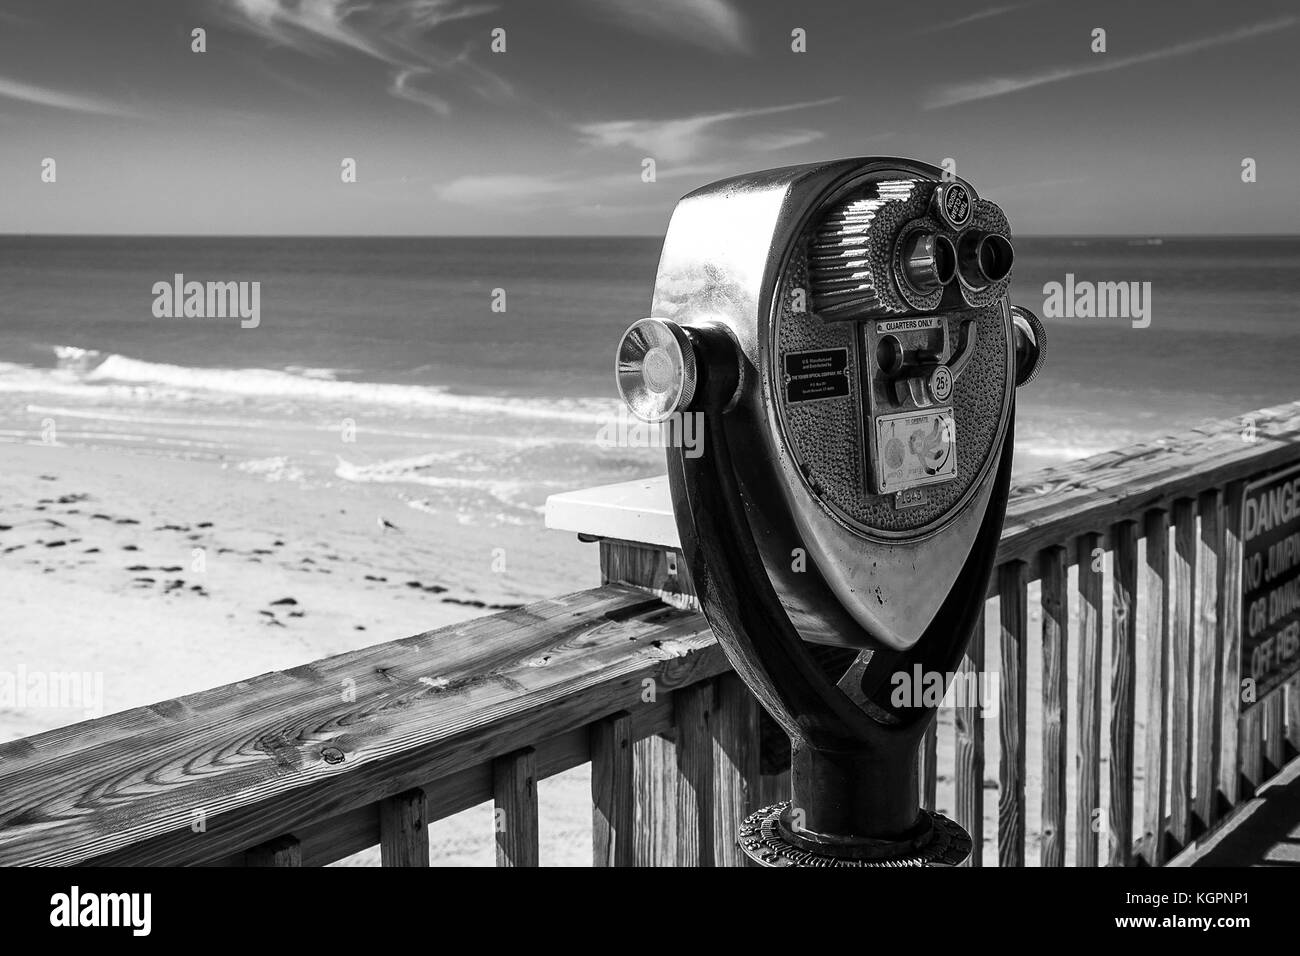 Viewfinder, fishing pier, Fort Mayers, Florida. Stock Photo